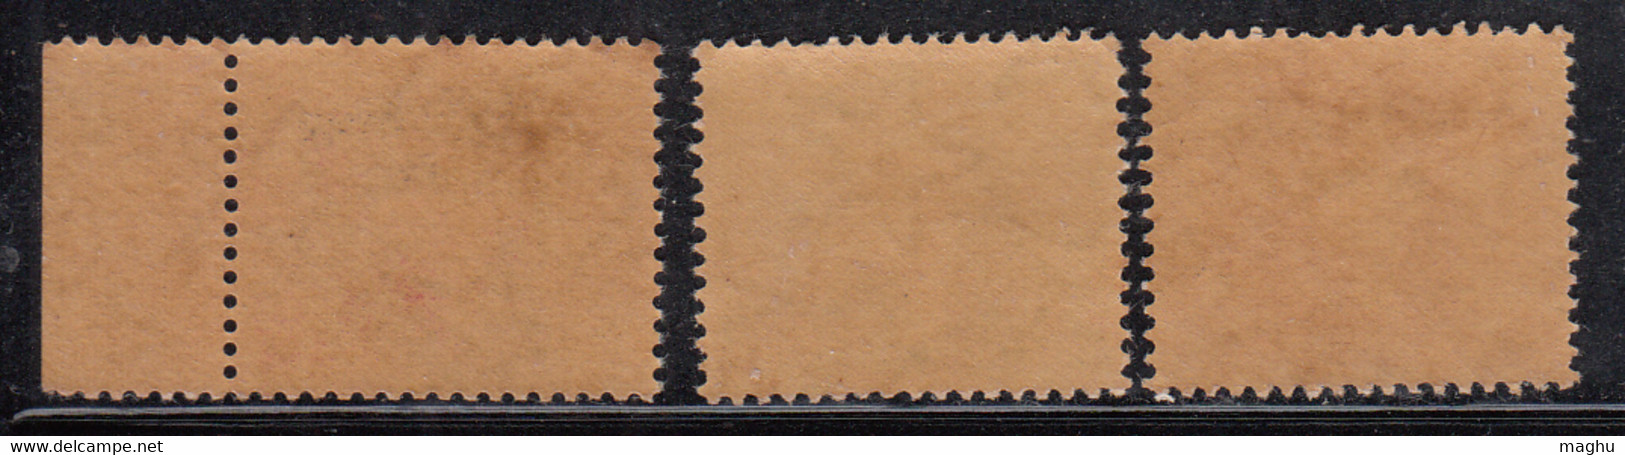 Star Watermark Series, Laos Opt. On 3v Map, India MNH 1957 - Military Service Stamp